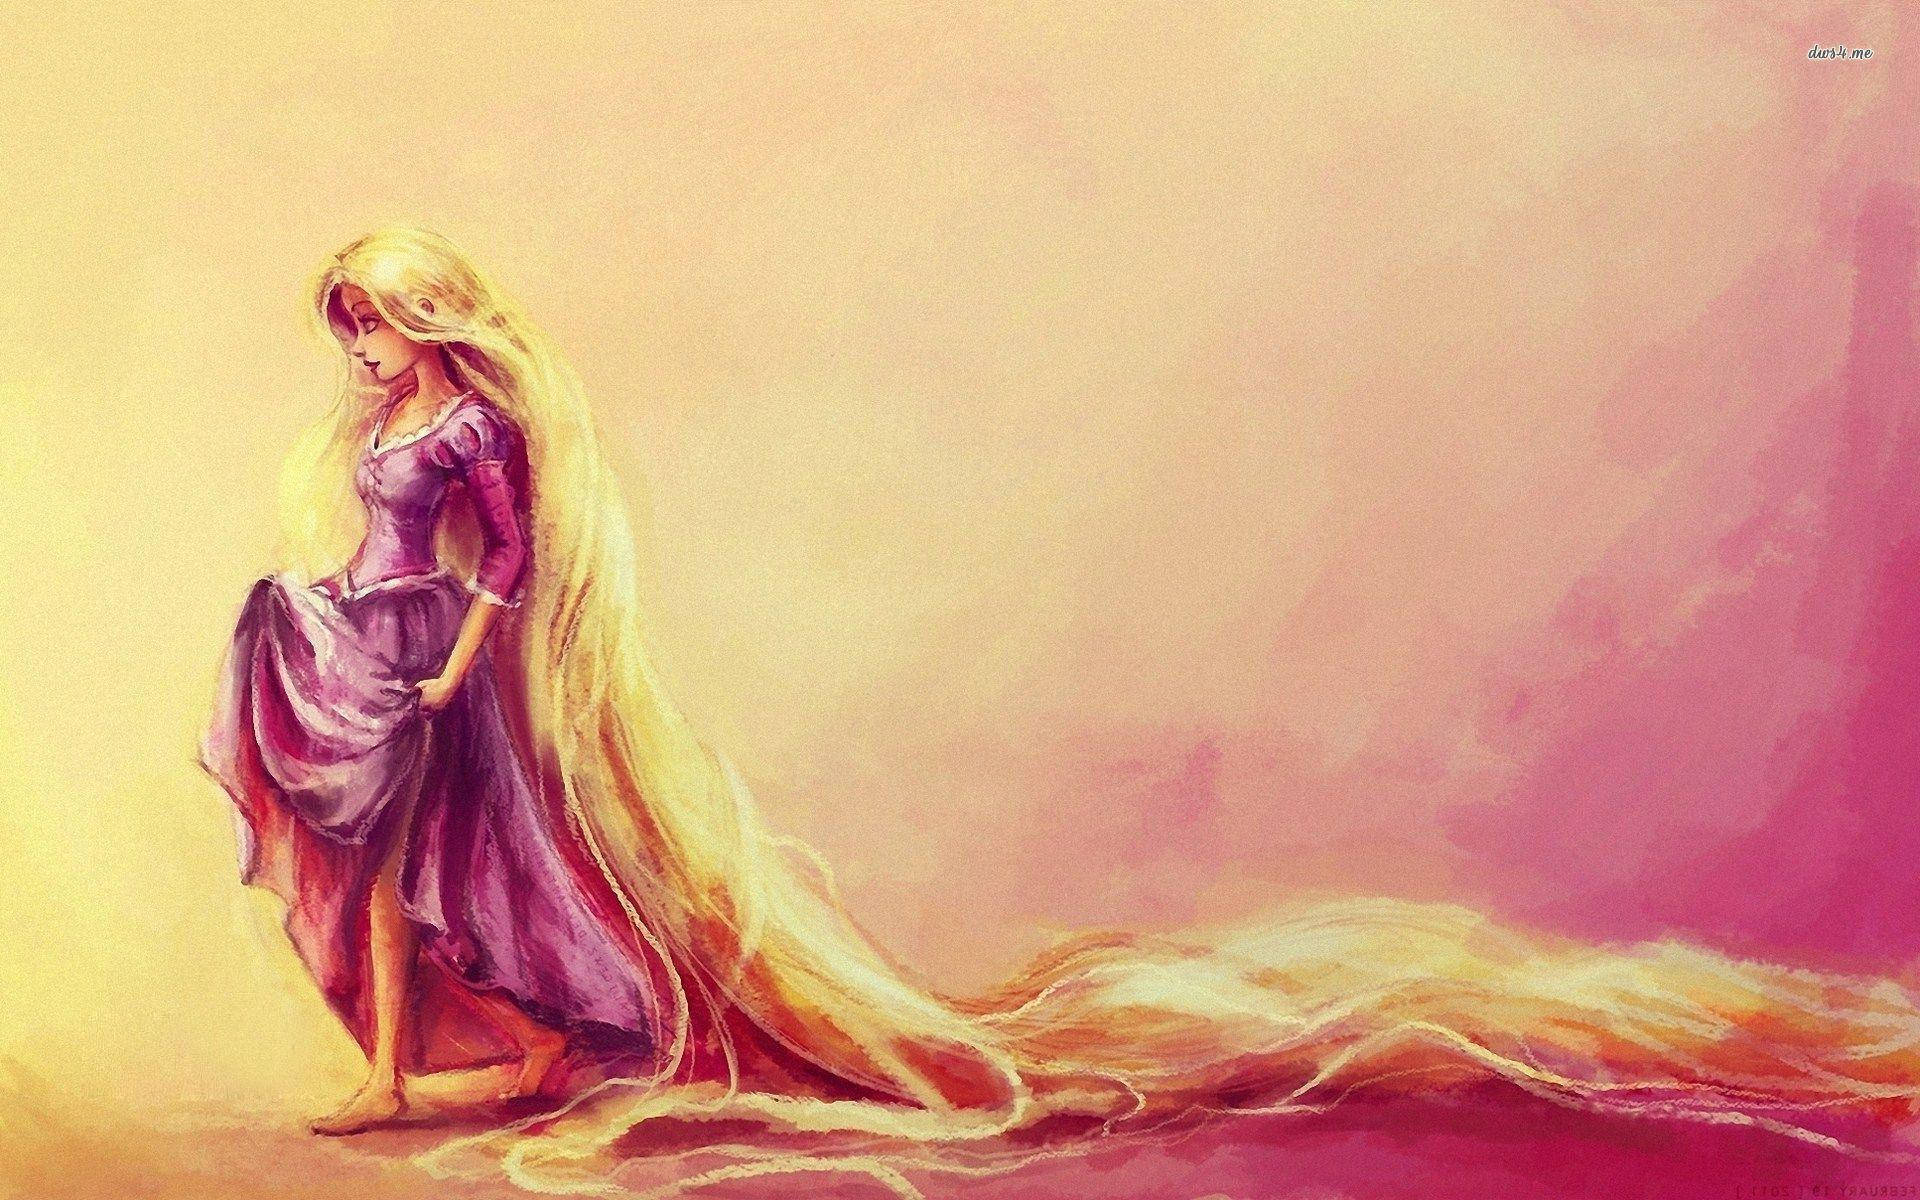 100+] Tangled Wallpapers